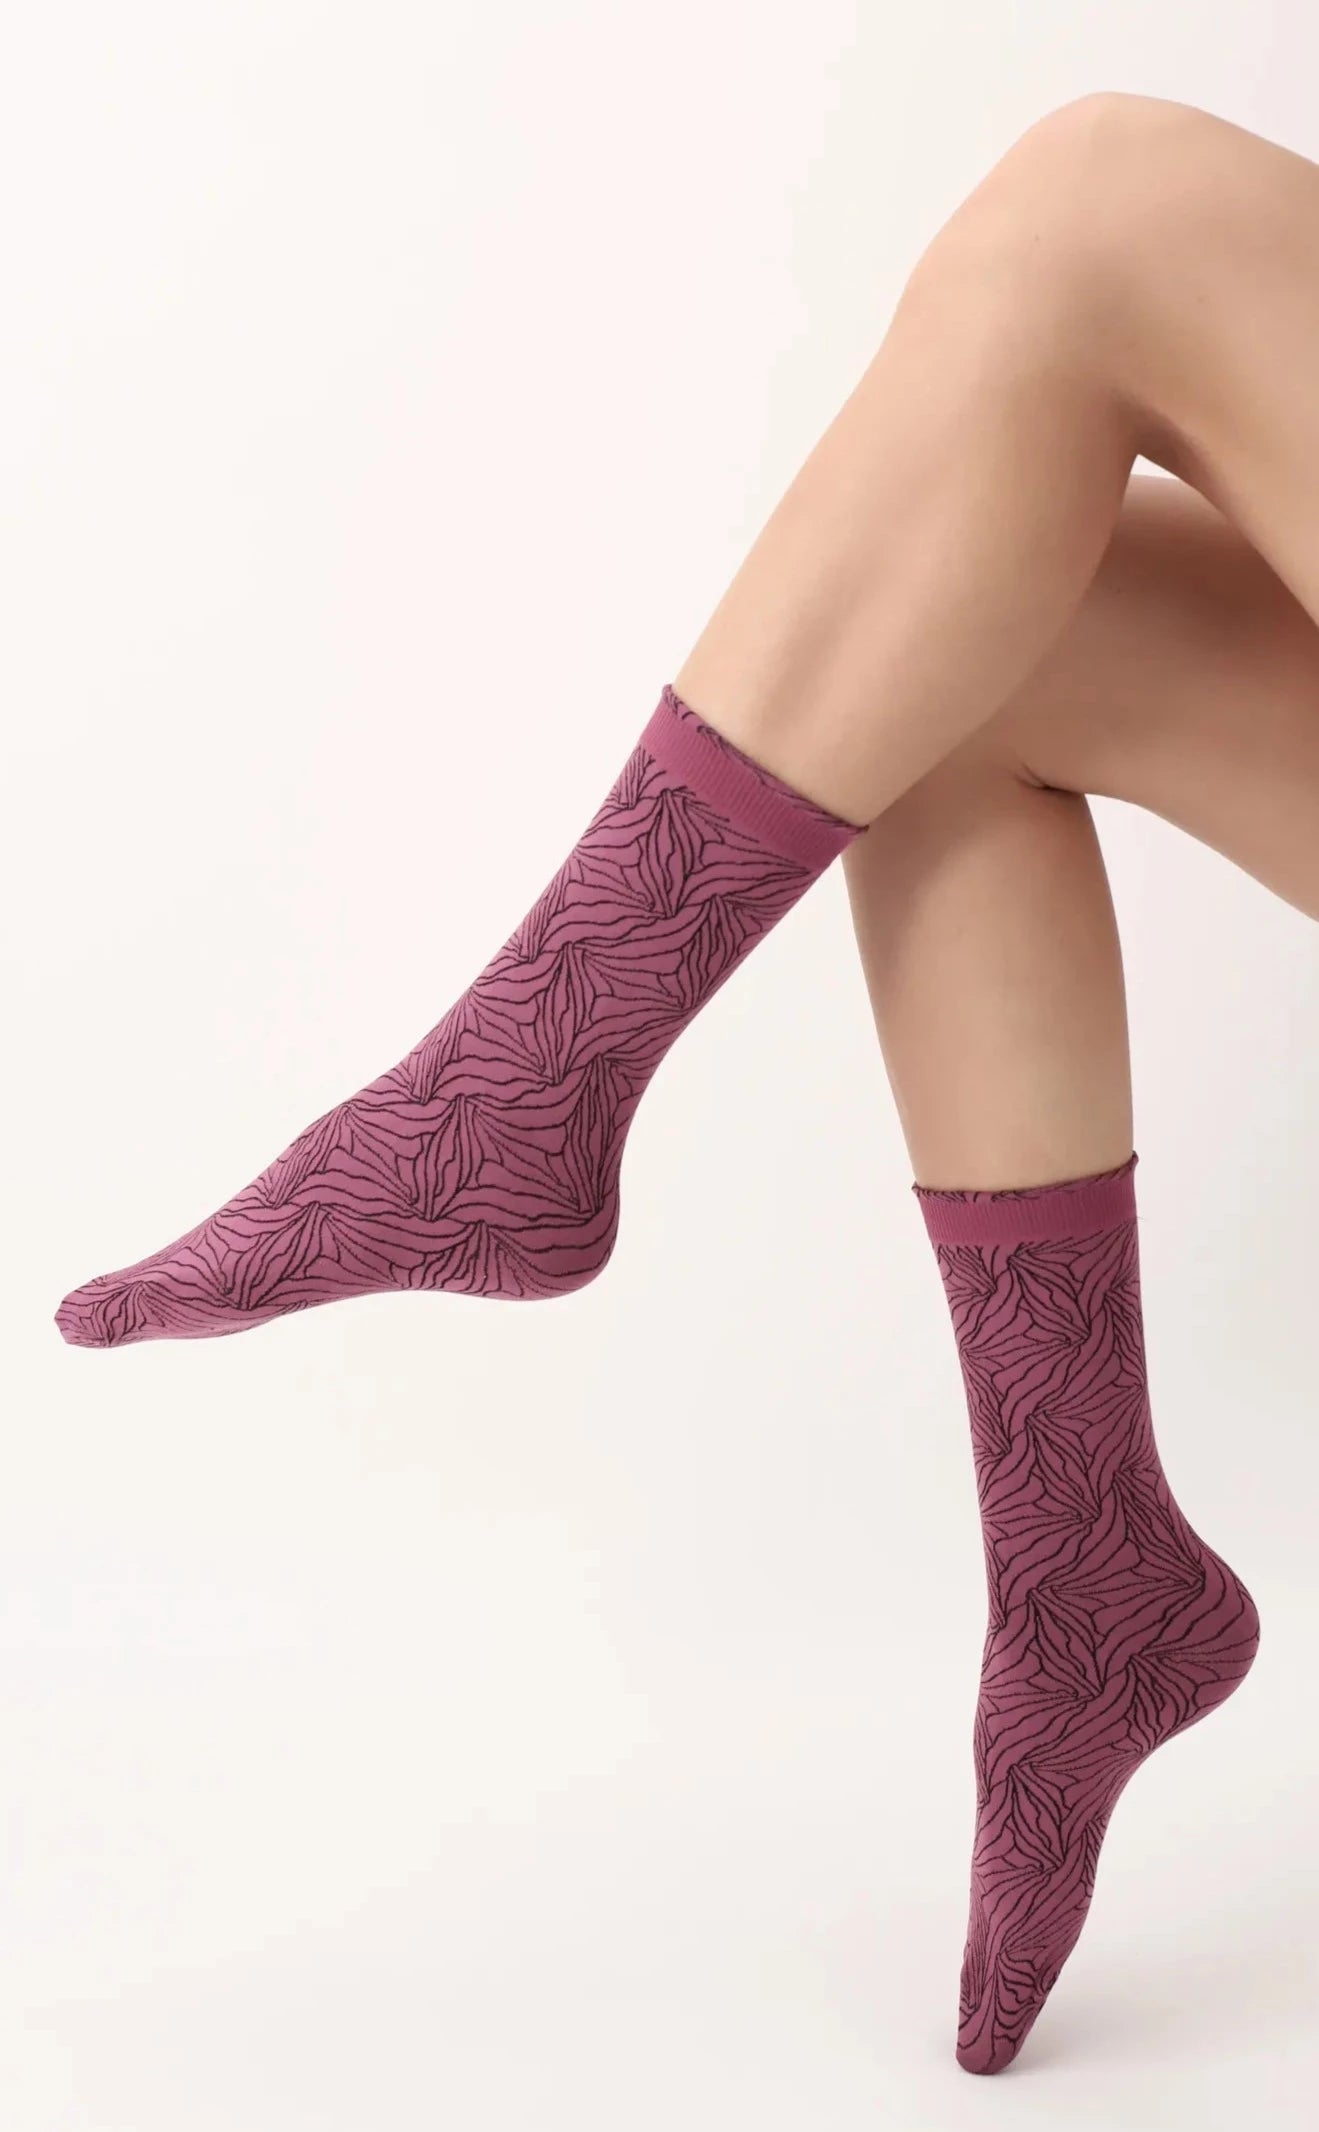 OorblÌ_ I Love Italy Milano Sock - Dusty rose pink opaque fashion ankle socks with a black wavy linear leaf style pattern and elasticated cuff.